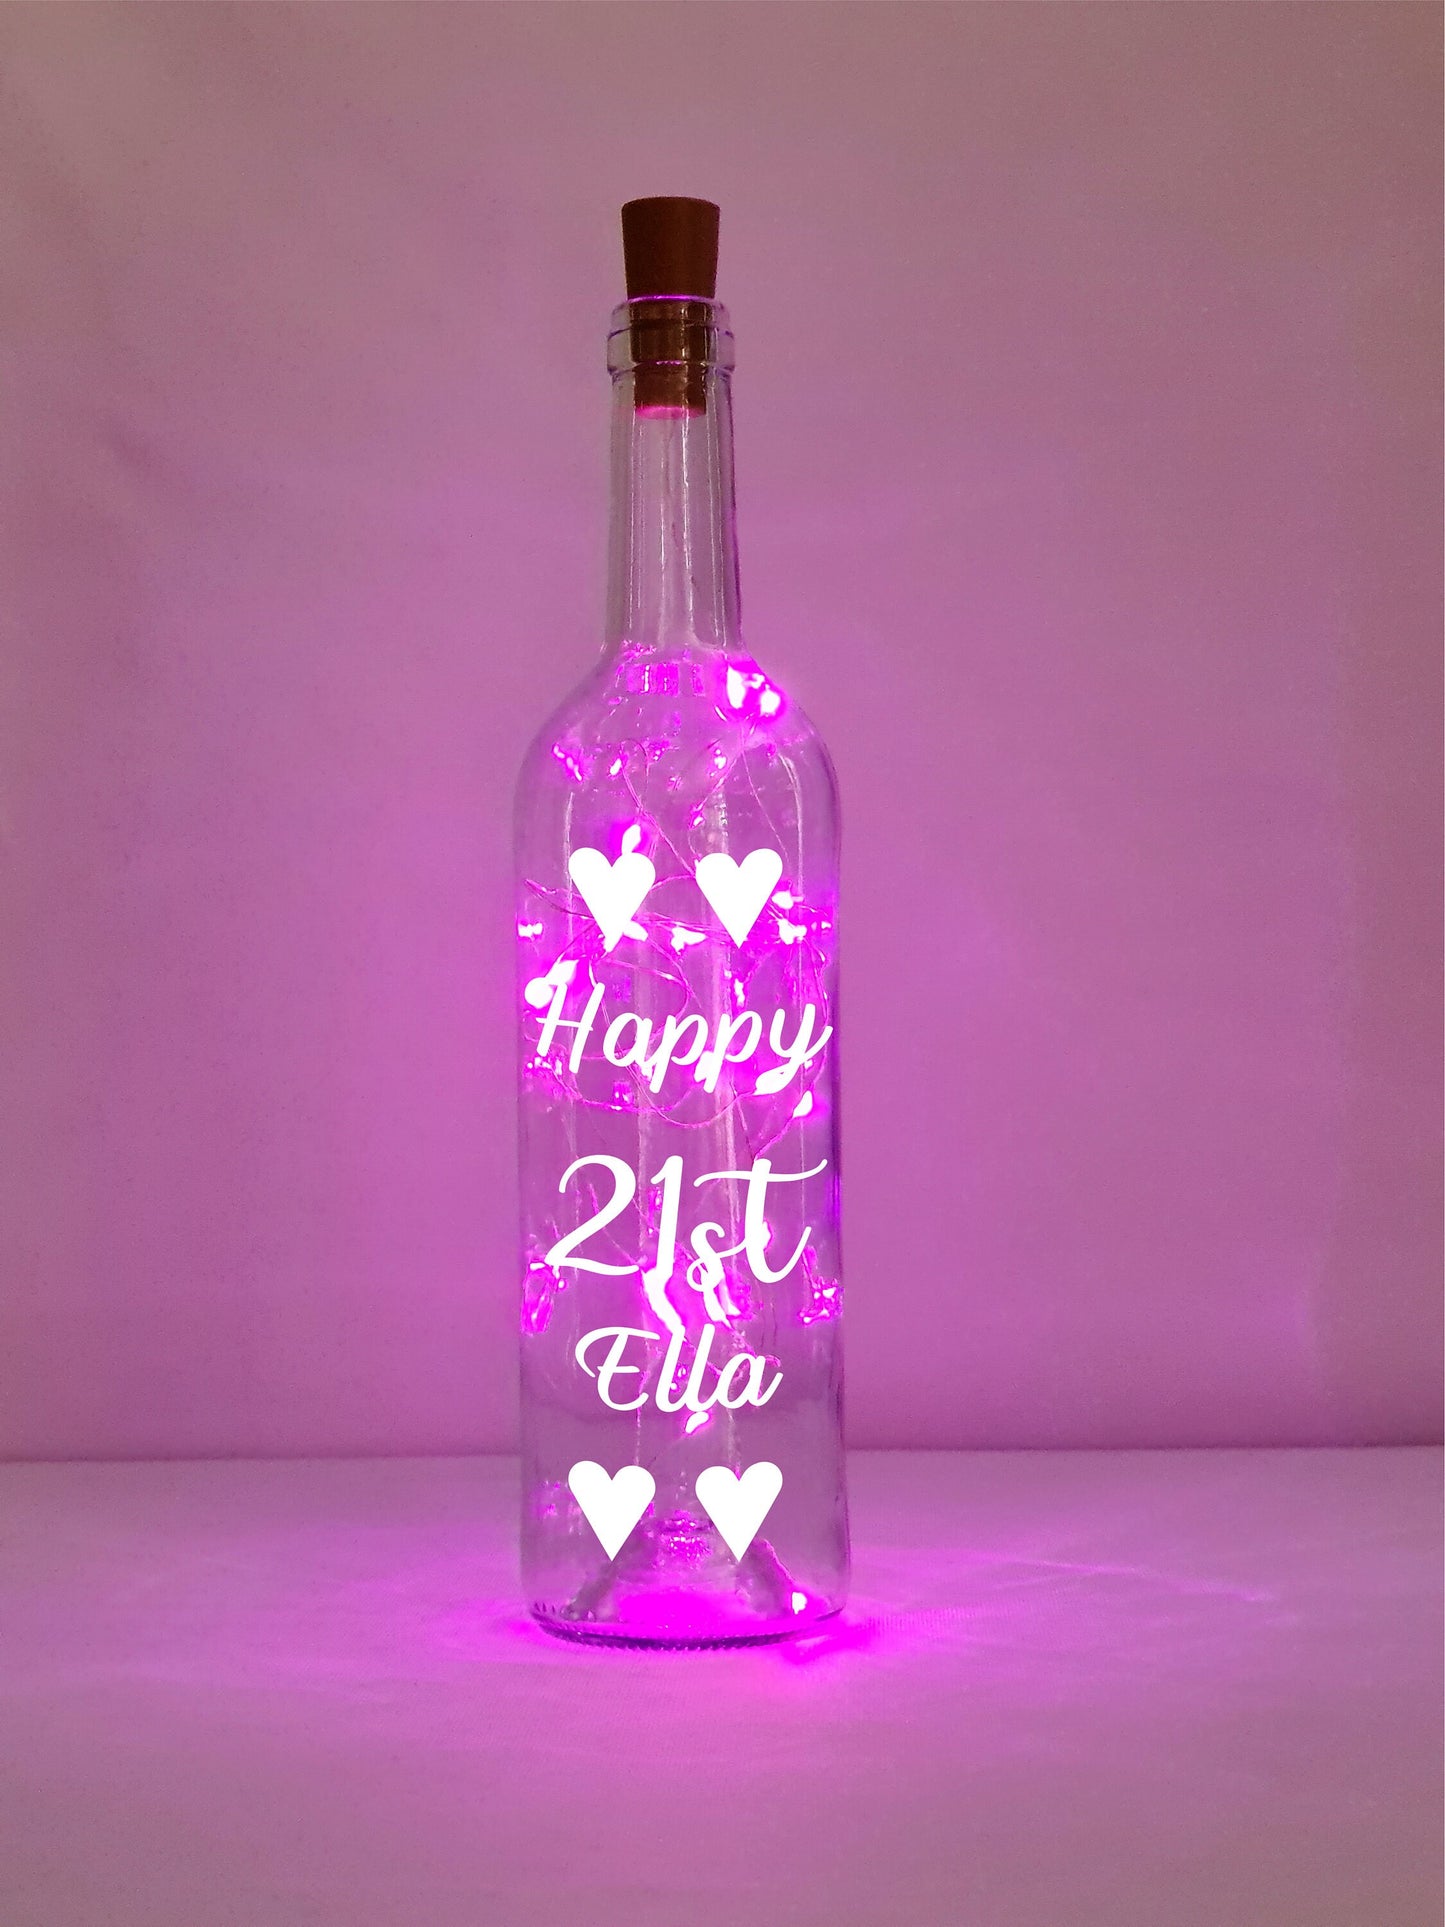 Personalised 21st Heart Birthday Gift, Light Up Wine Bottle, Heart Gift For Her, Gift For Him, Wife Present, White Lights, Pink, Blue